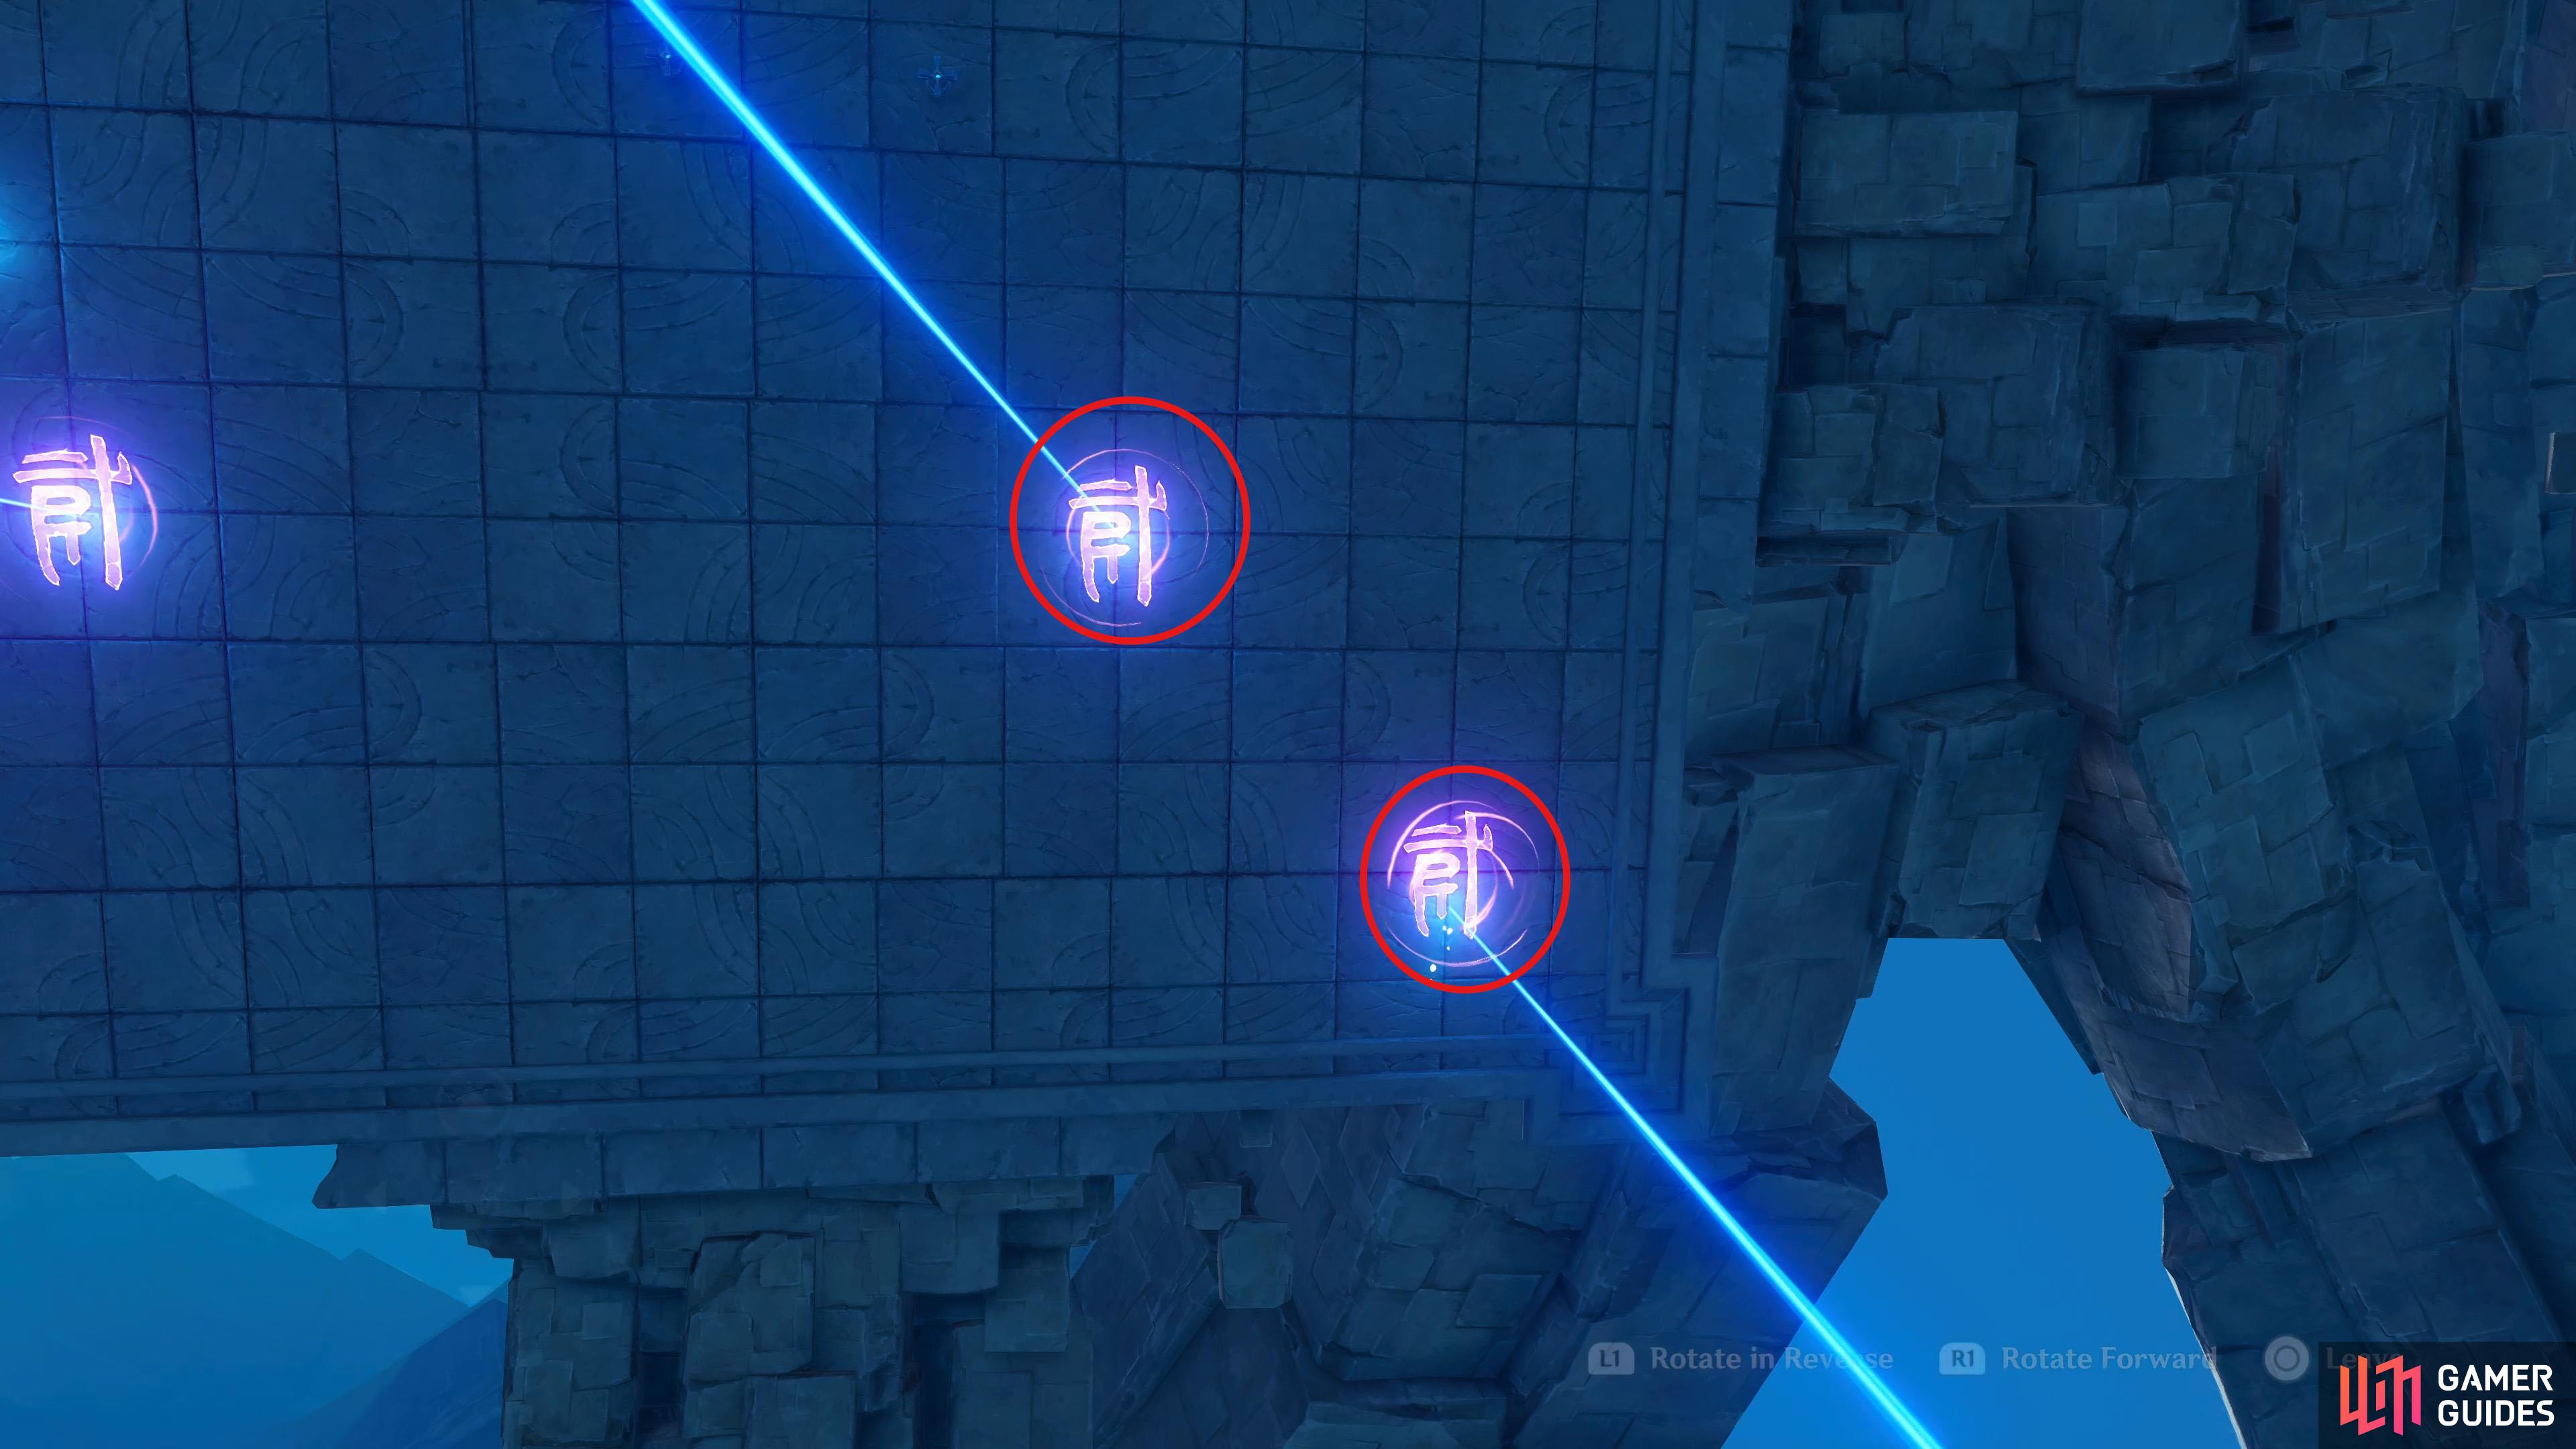 and the Lightshape with the larger gap needs to activate the runes in the southeast.